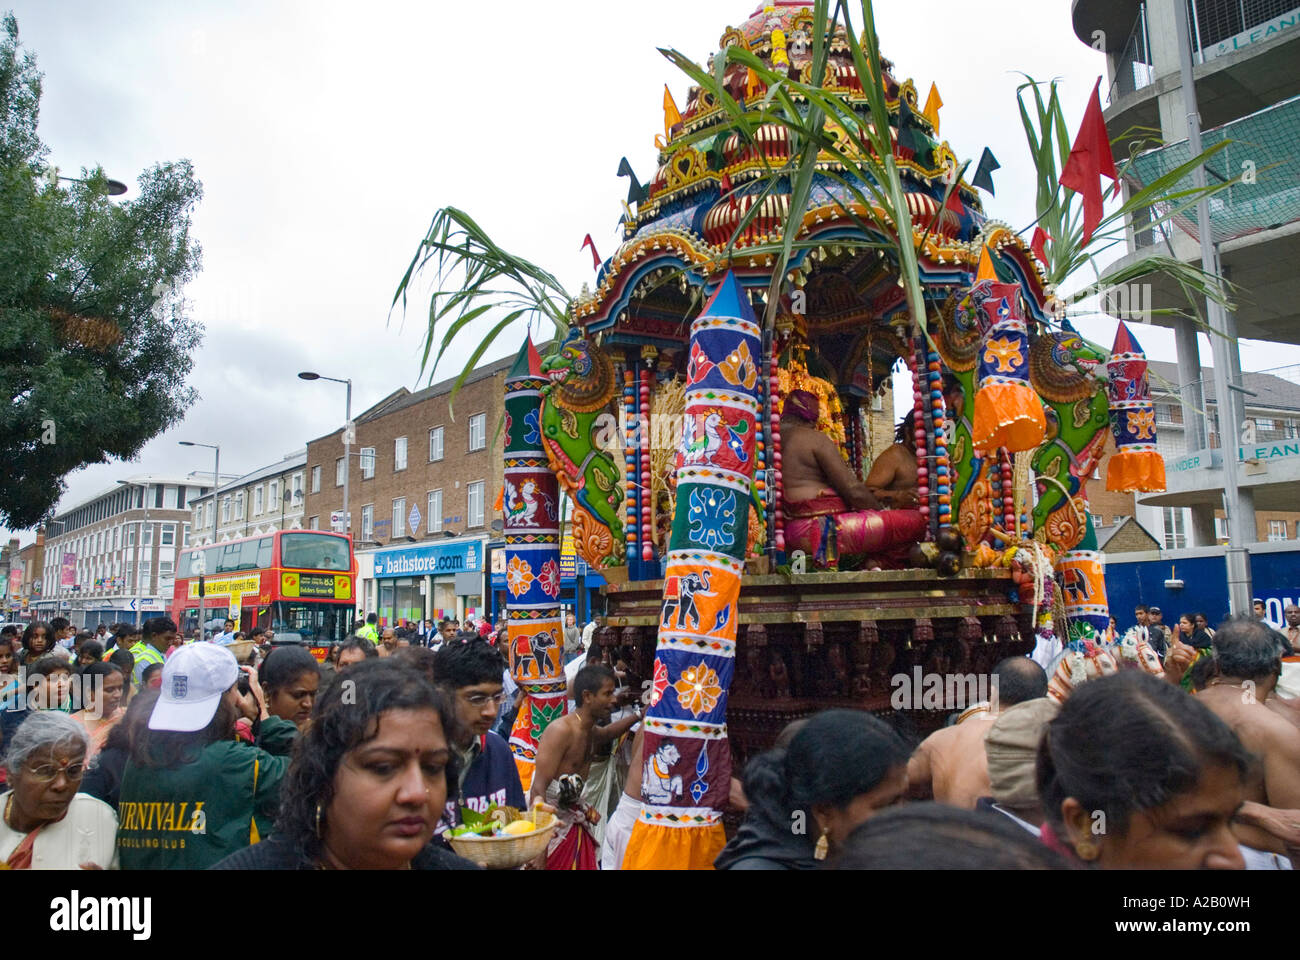 The Charriot from the Sri Kanaga Thurkai Amman Temple the annual Chariot Festival West Ealing London Stock Photo